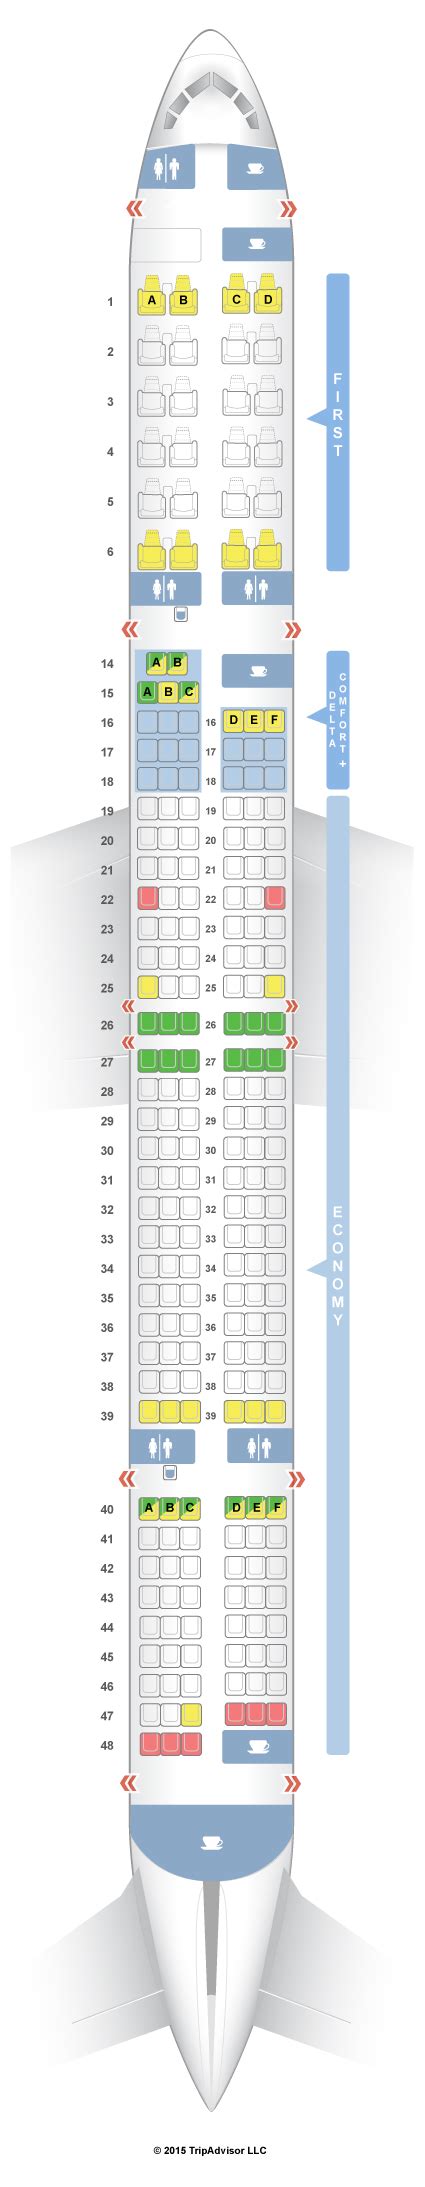 For your next Delta flight, use this seating chart to get the most comfortable seats, legroom, and recline on. . Delta 757300 seatguru